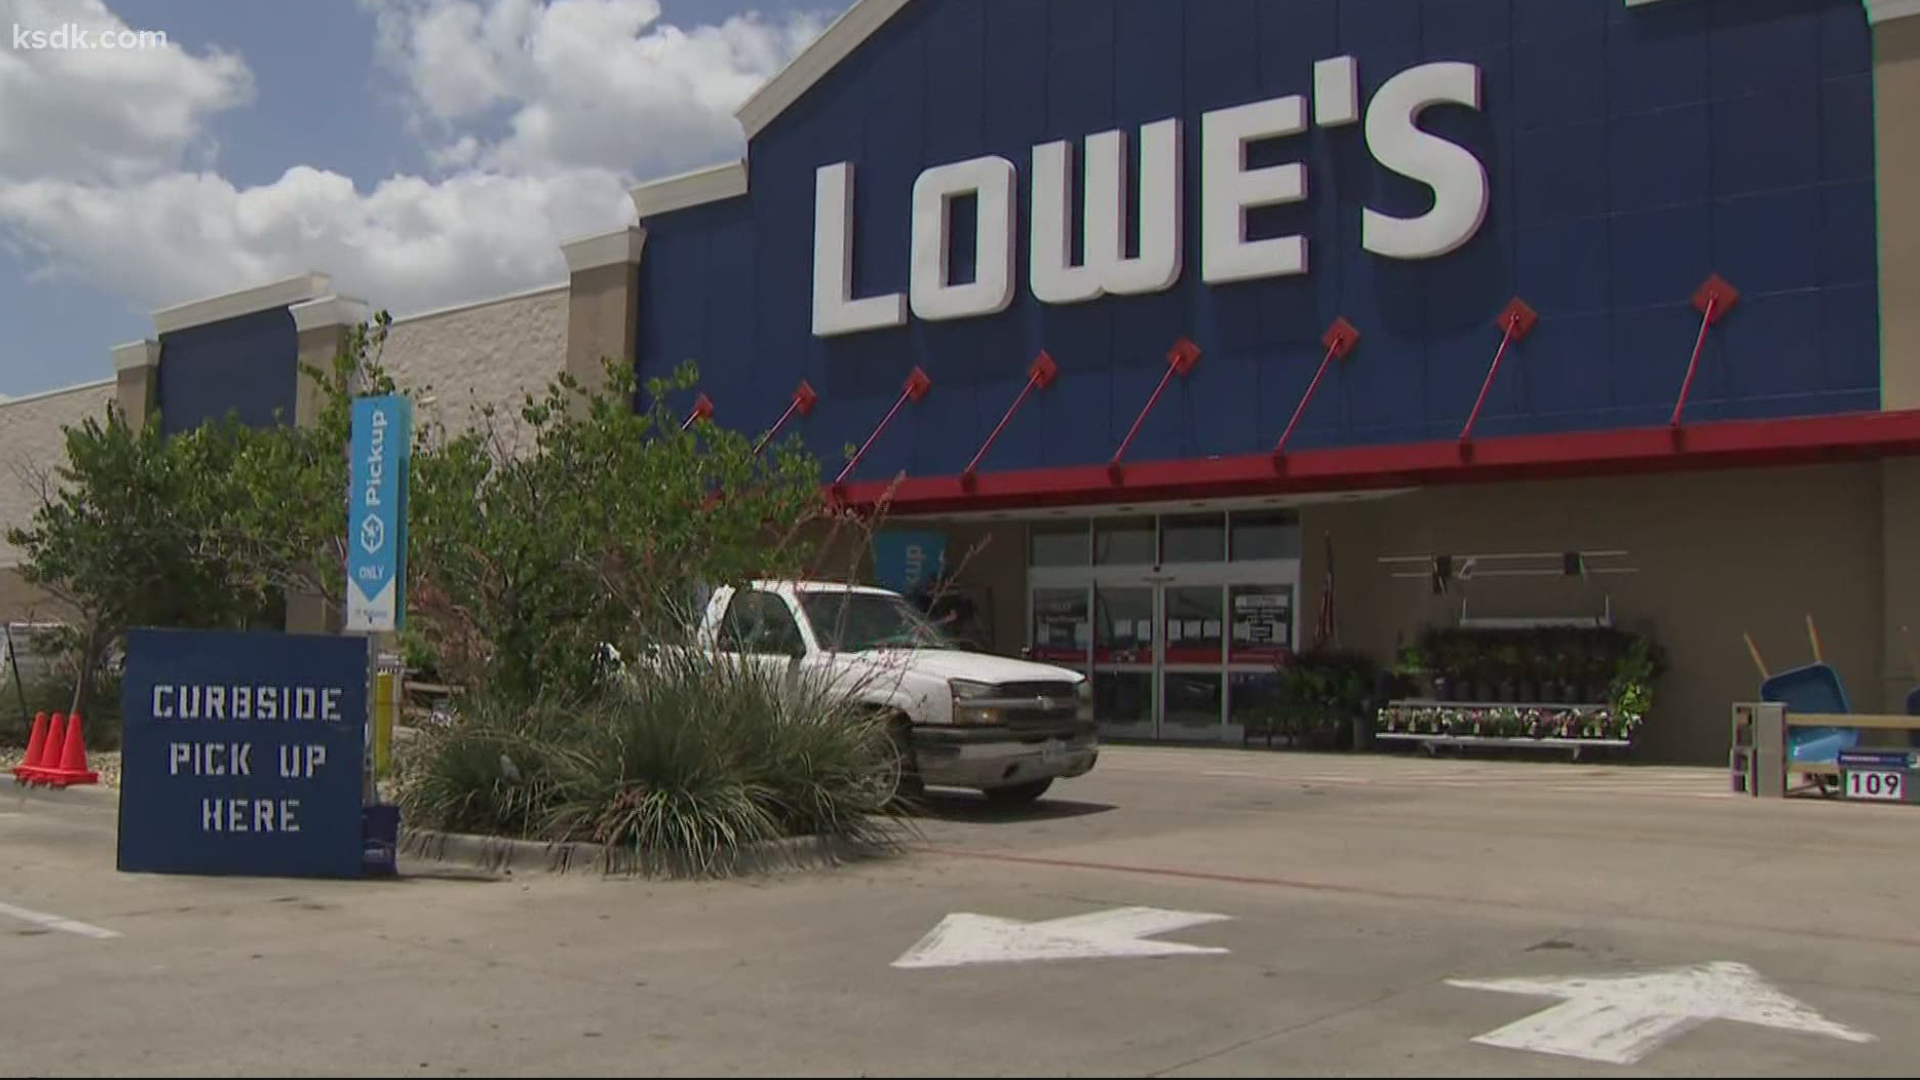 This will be the seventh bonus Lowe's has given hourly employees during the pandemic